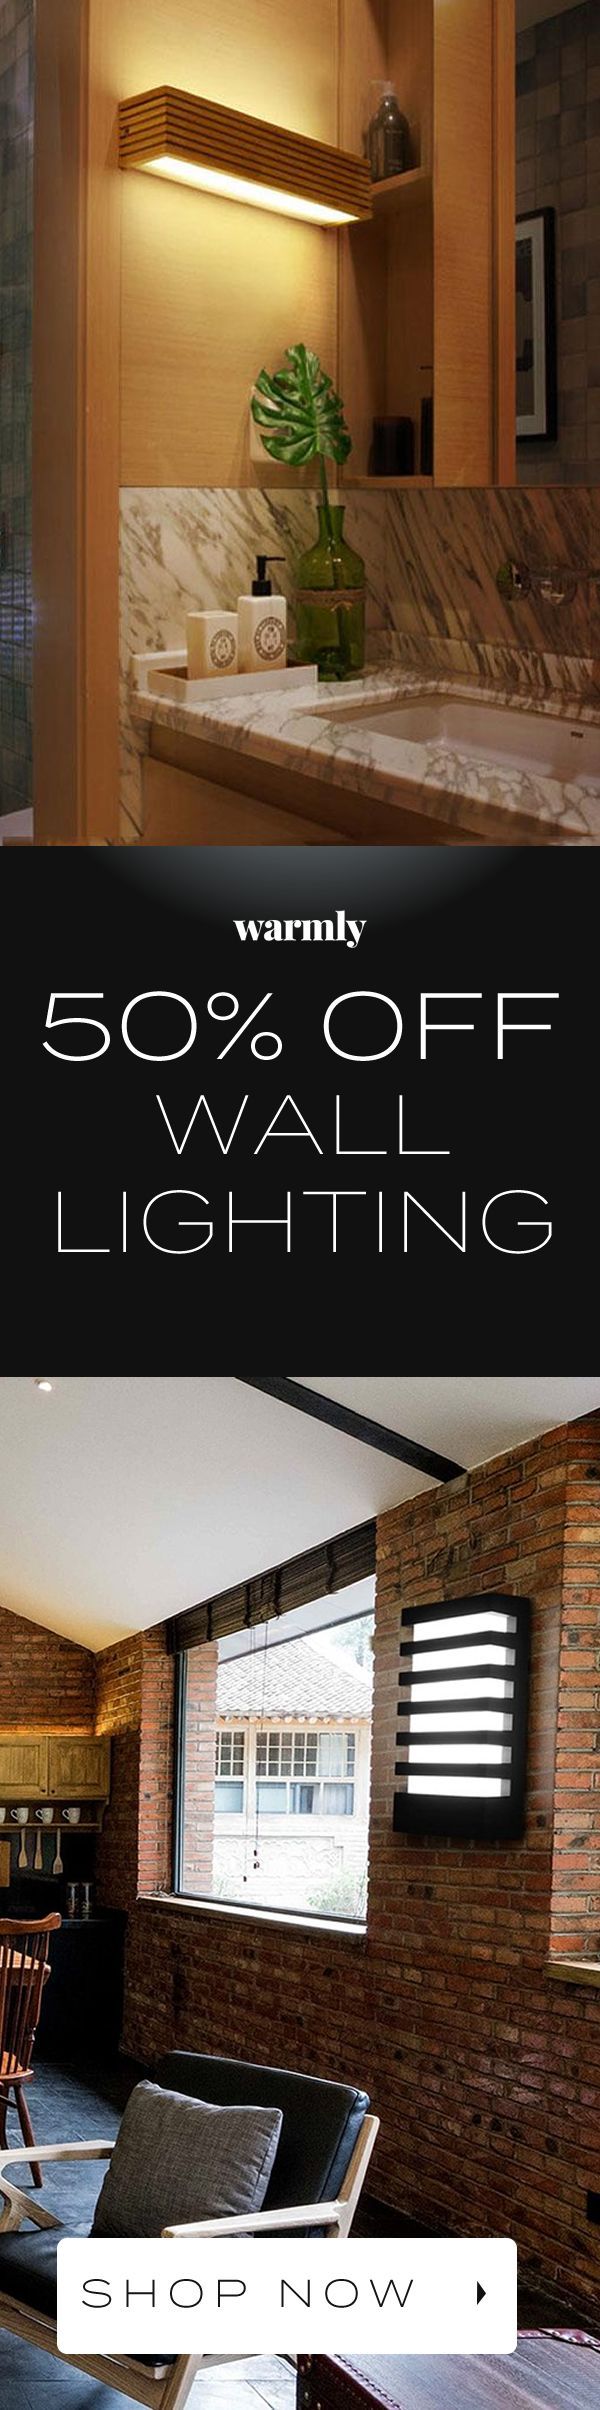 50% Off Wall Lighting at Warmly - ????? (5/5) -   16 yellow gold decor
 ideas